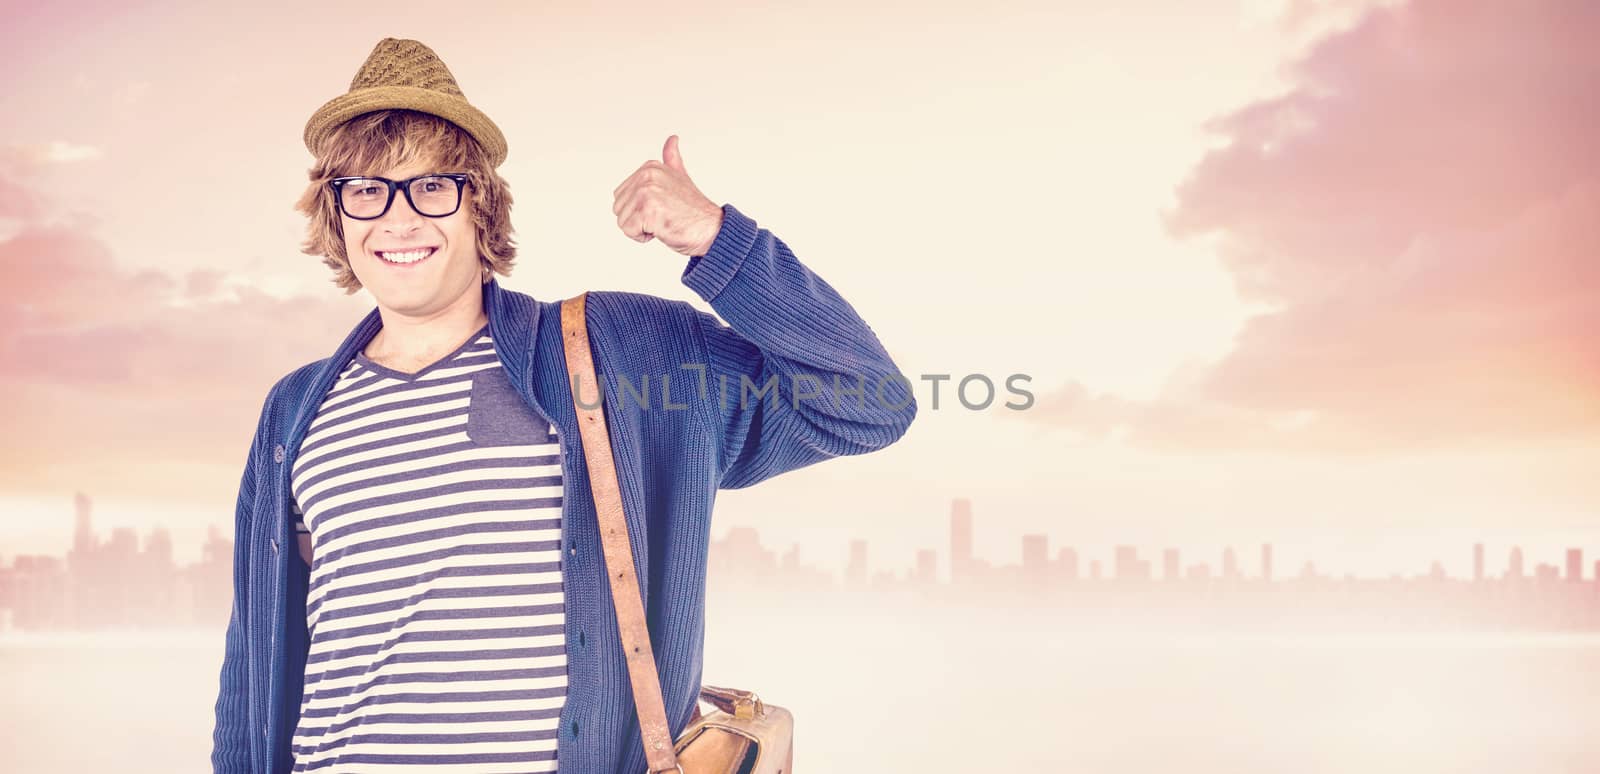 Composite image of smiling hipster making thumbs up by Wavebreakmedia